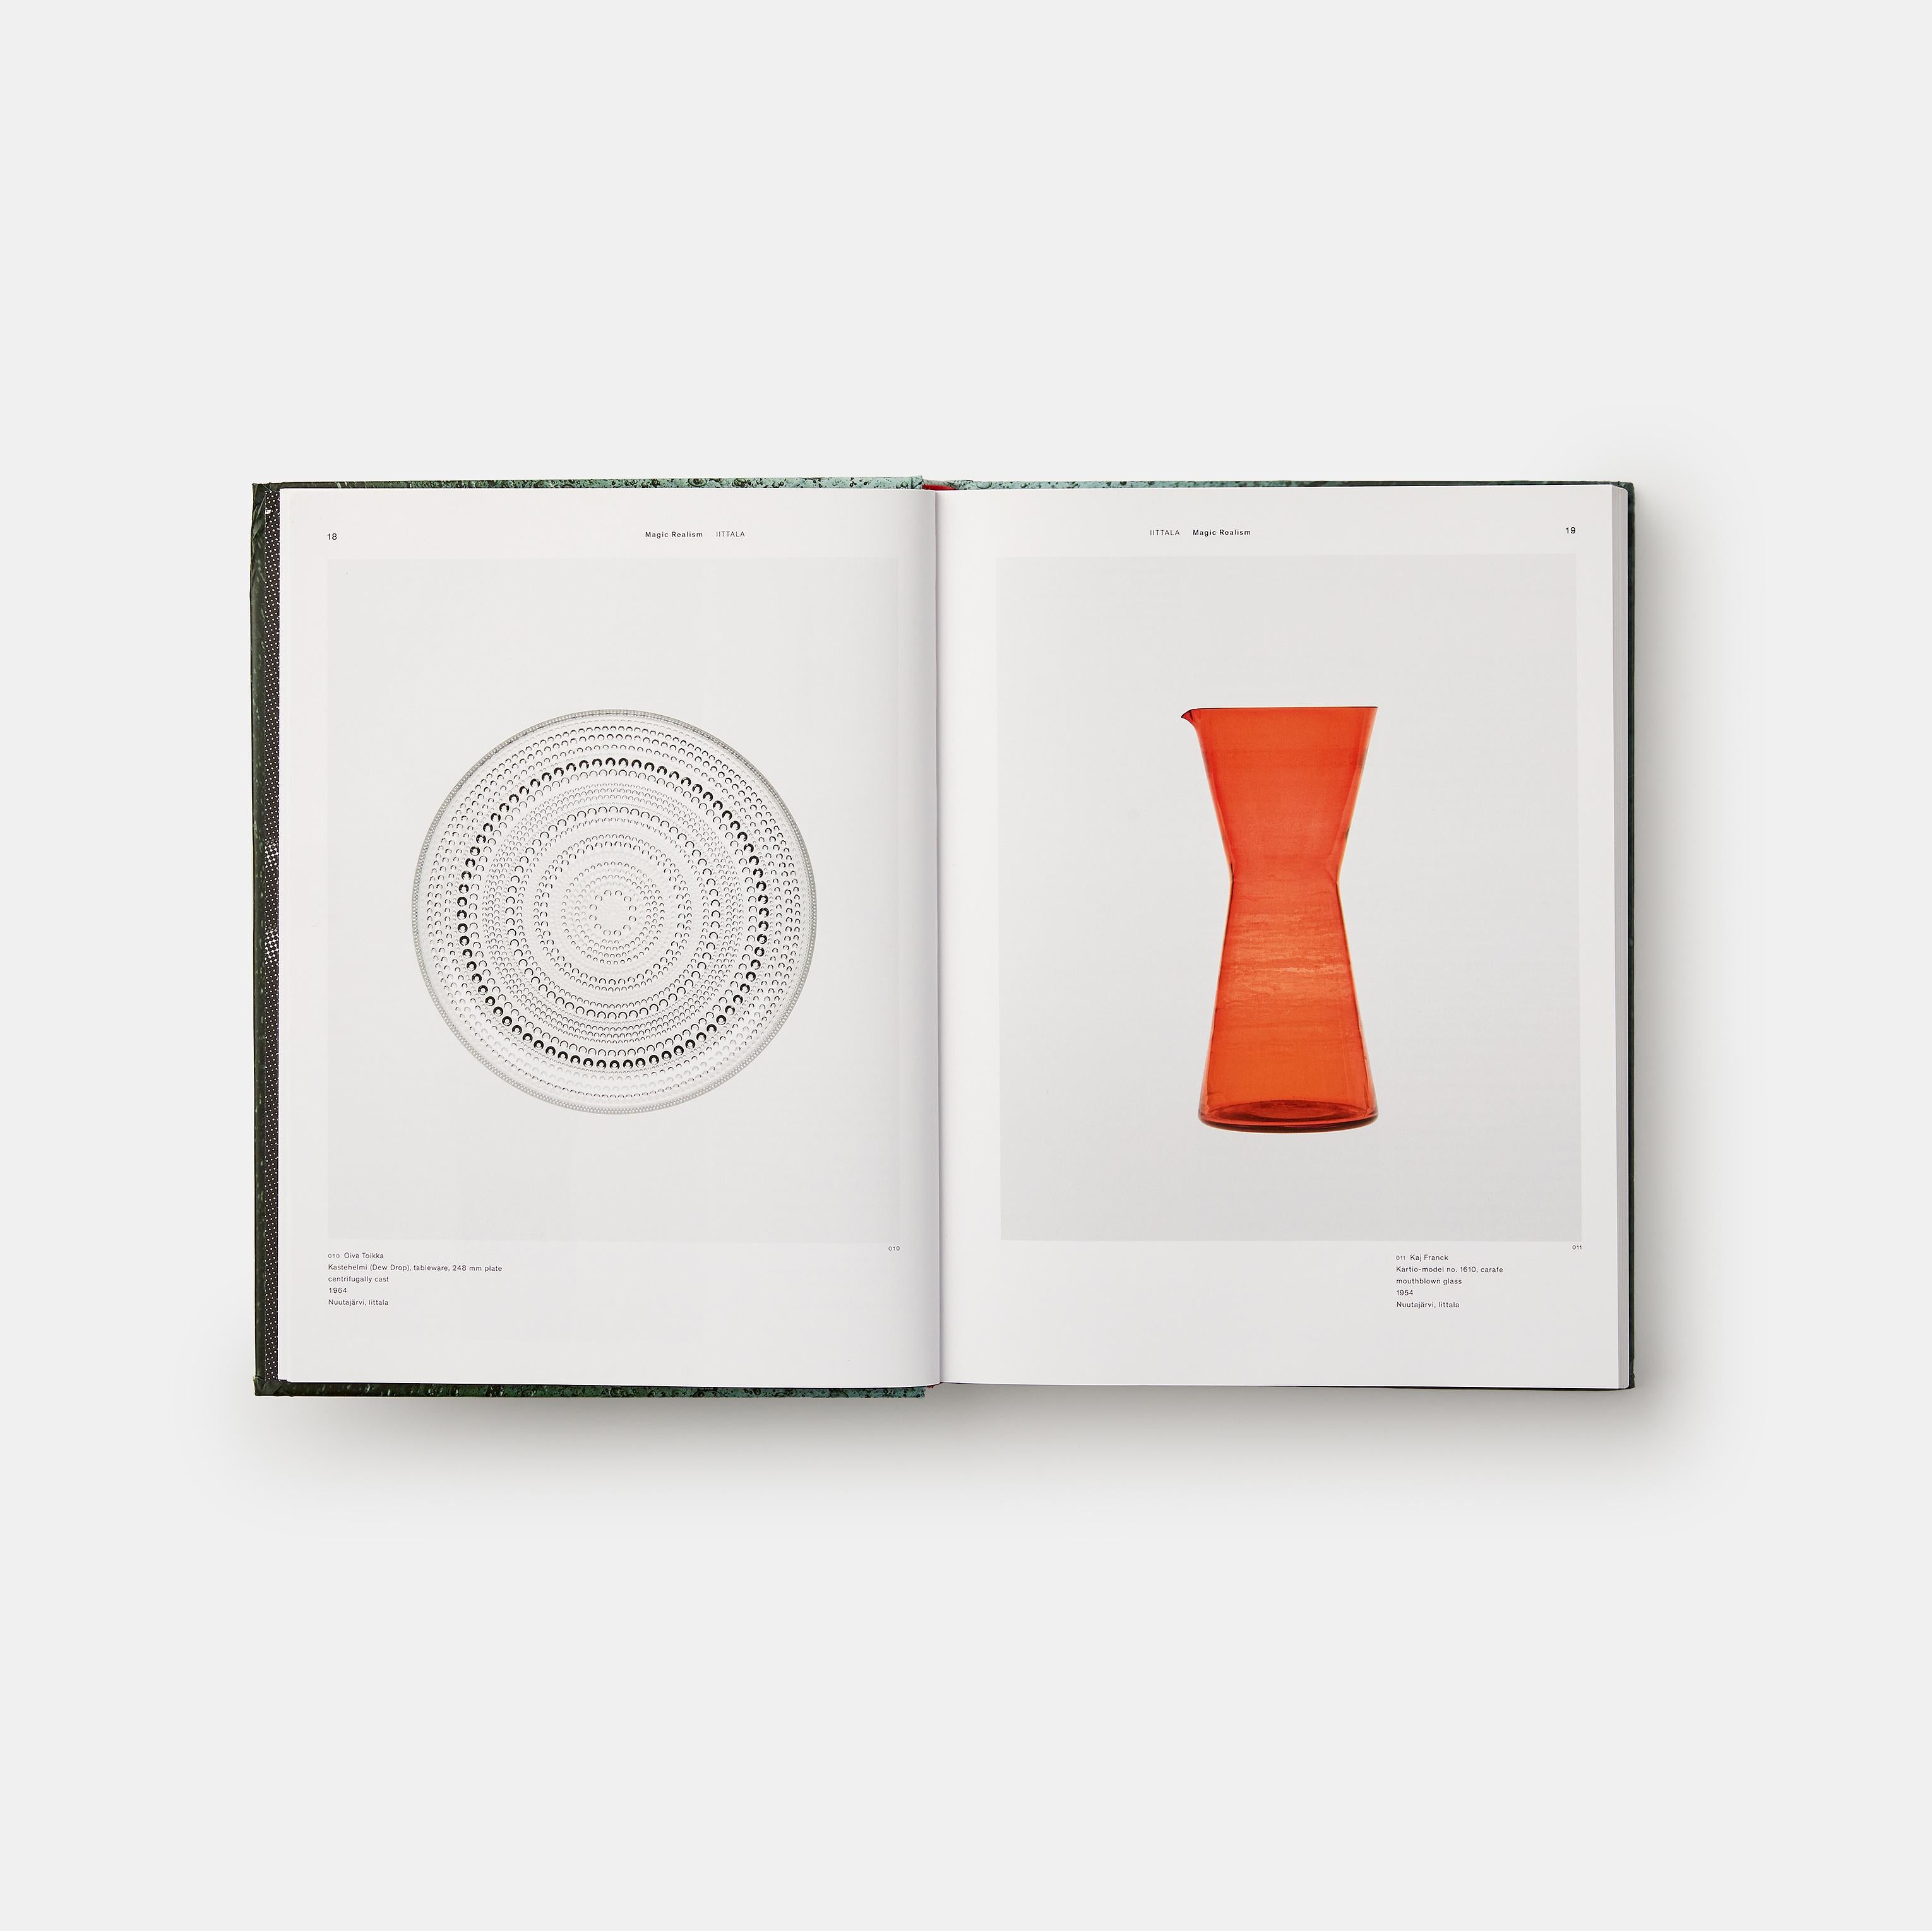 The first book to comprehensively document the 140-year history and influence of Finland's legendary product design brand

Iittala is a world-renowned master of Finnish design, producing objects that are as timeless and beautiful as they are